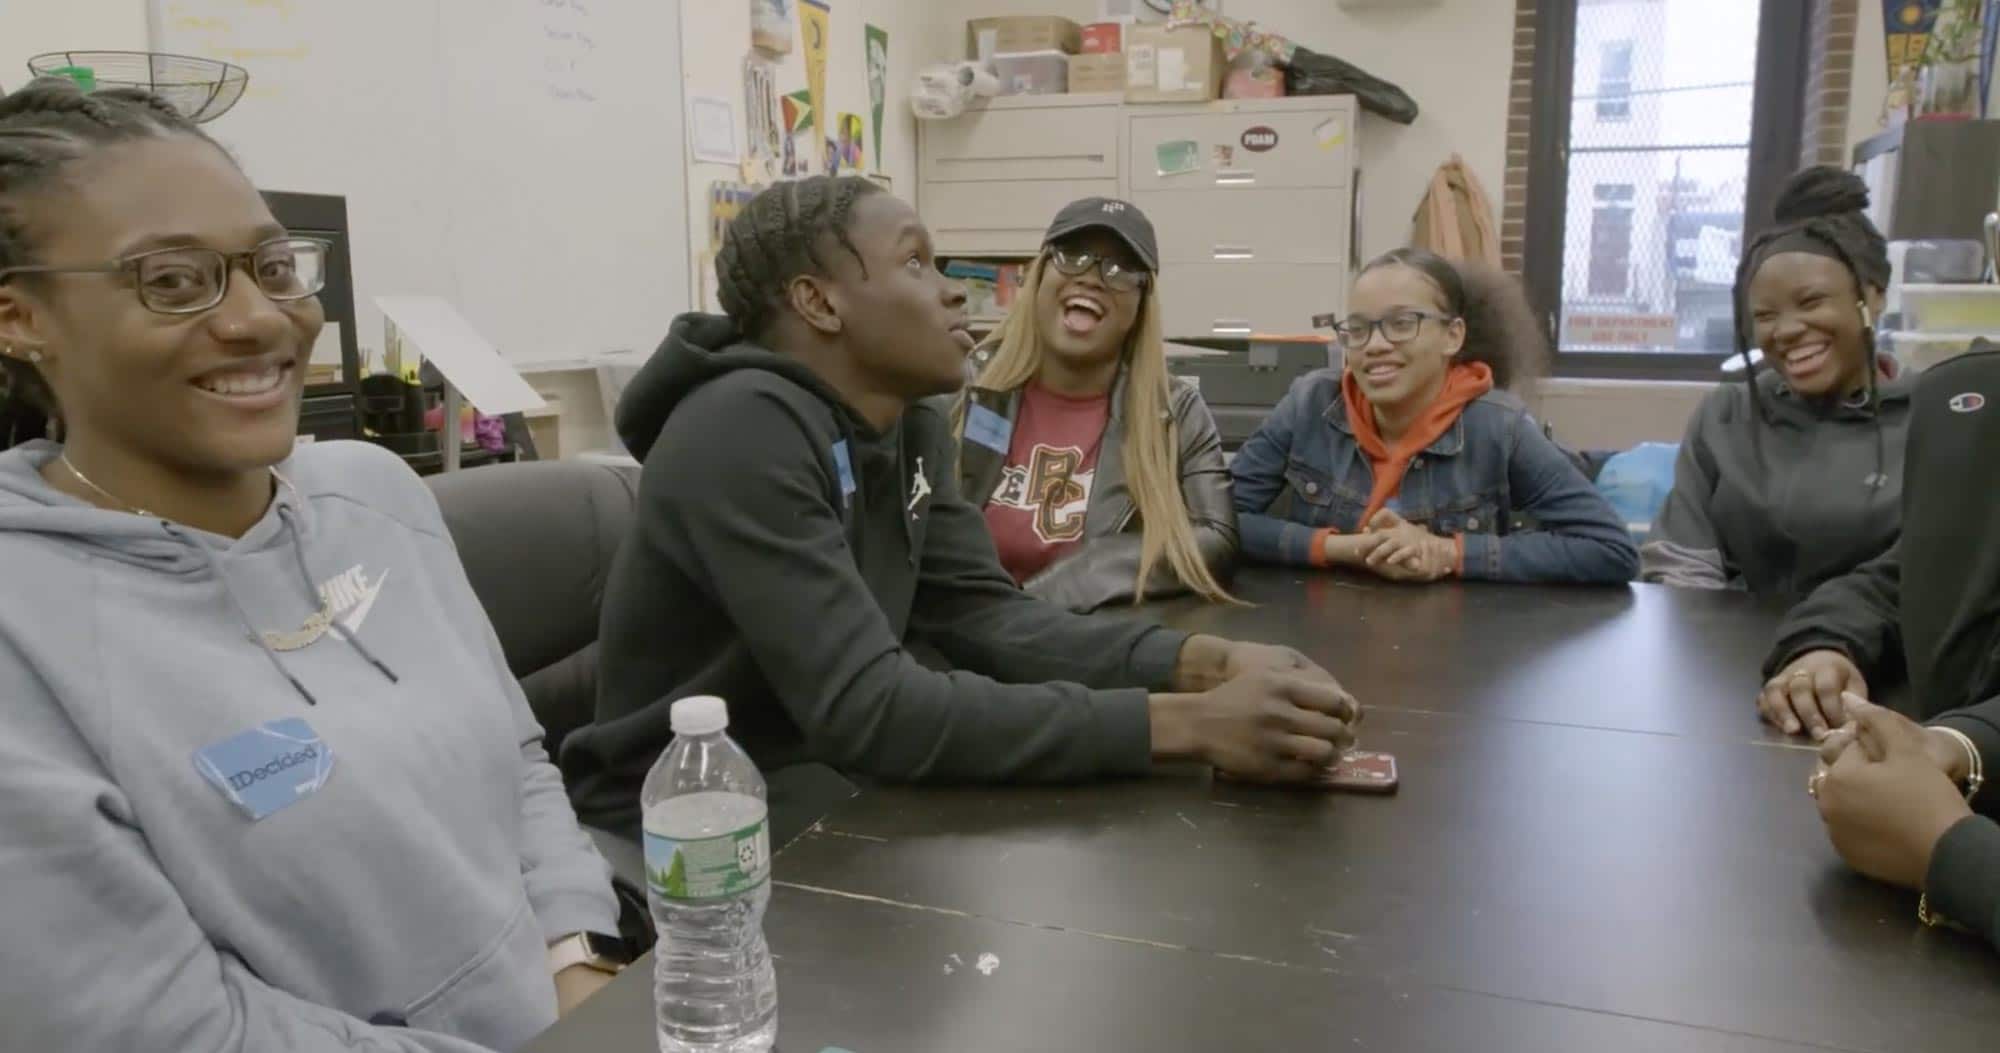 Counseling In Schools Helping New York City students, group of students at a table laughing